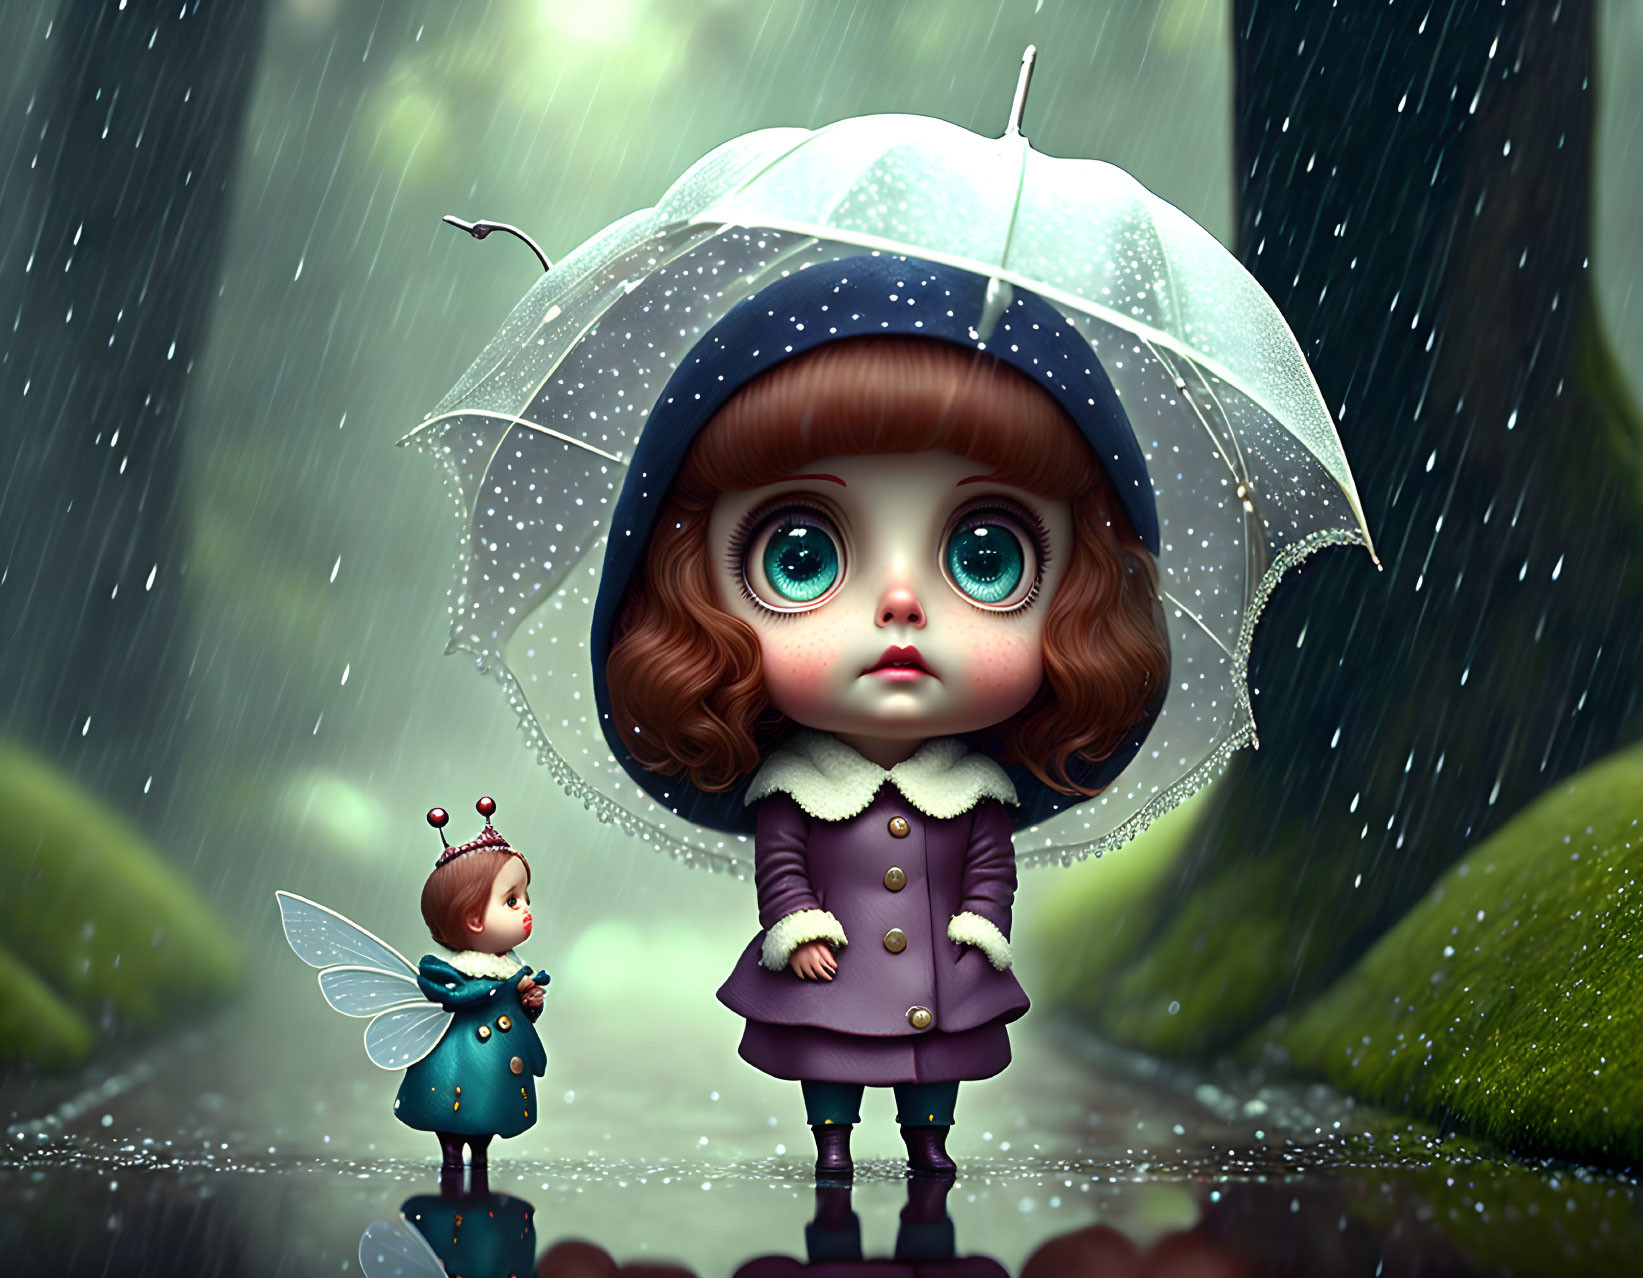 Digital illustration of big-eyed girl with umbrella and fairy in rain-drenched forest